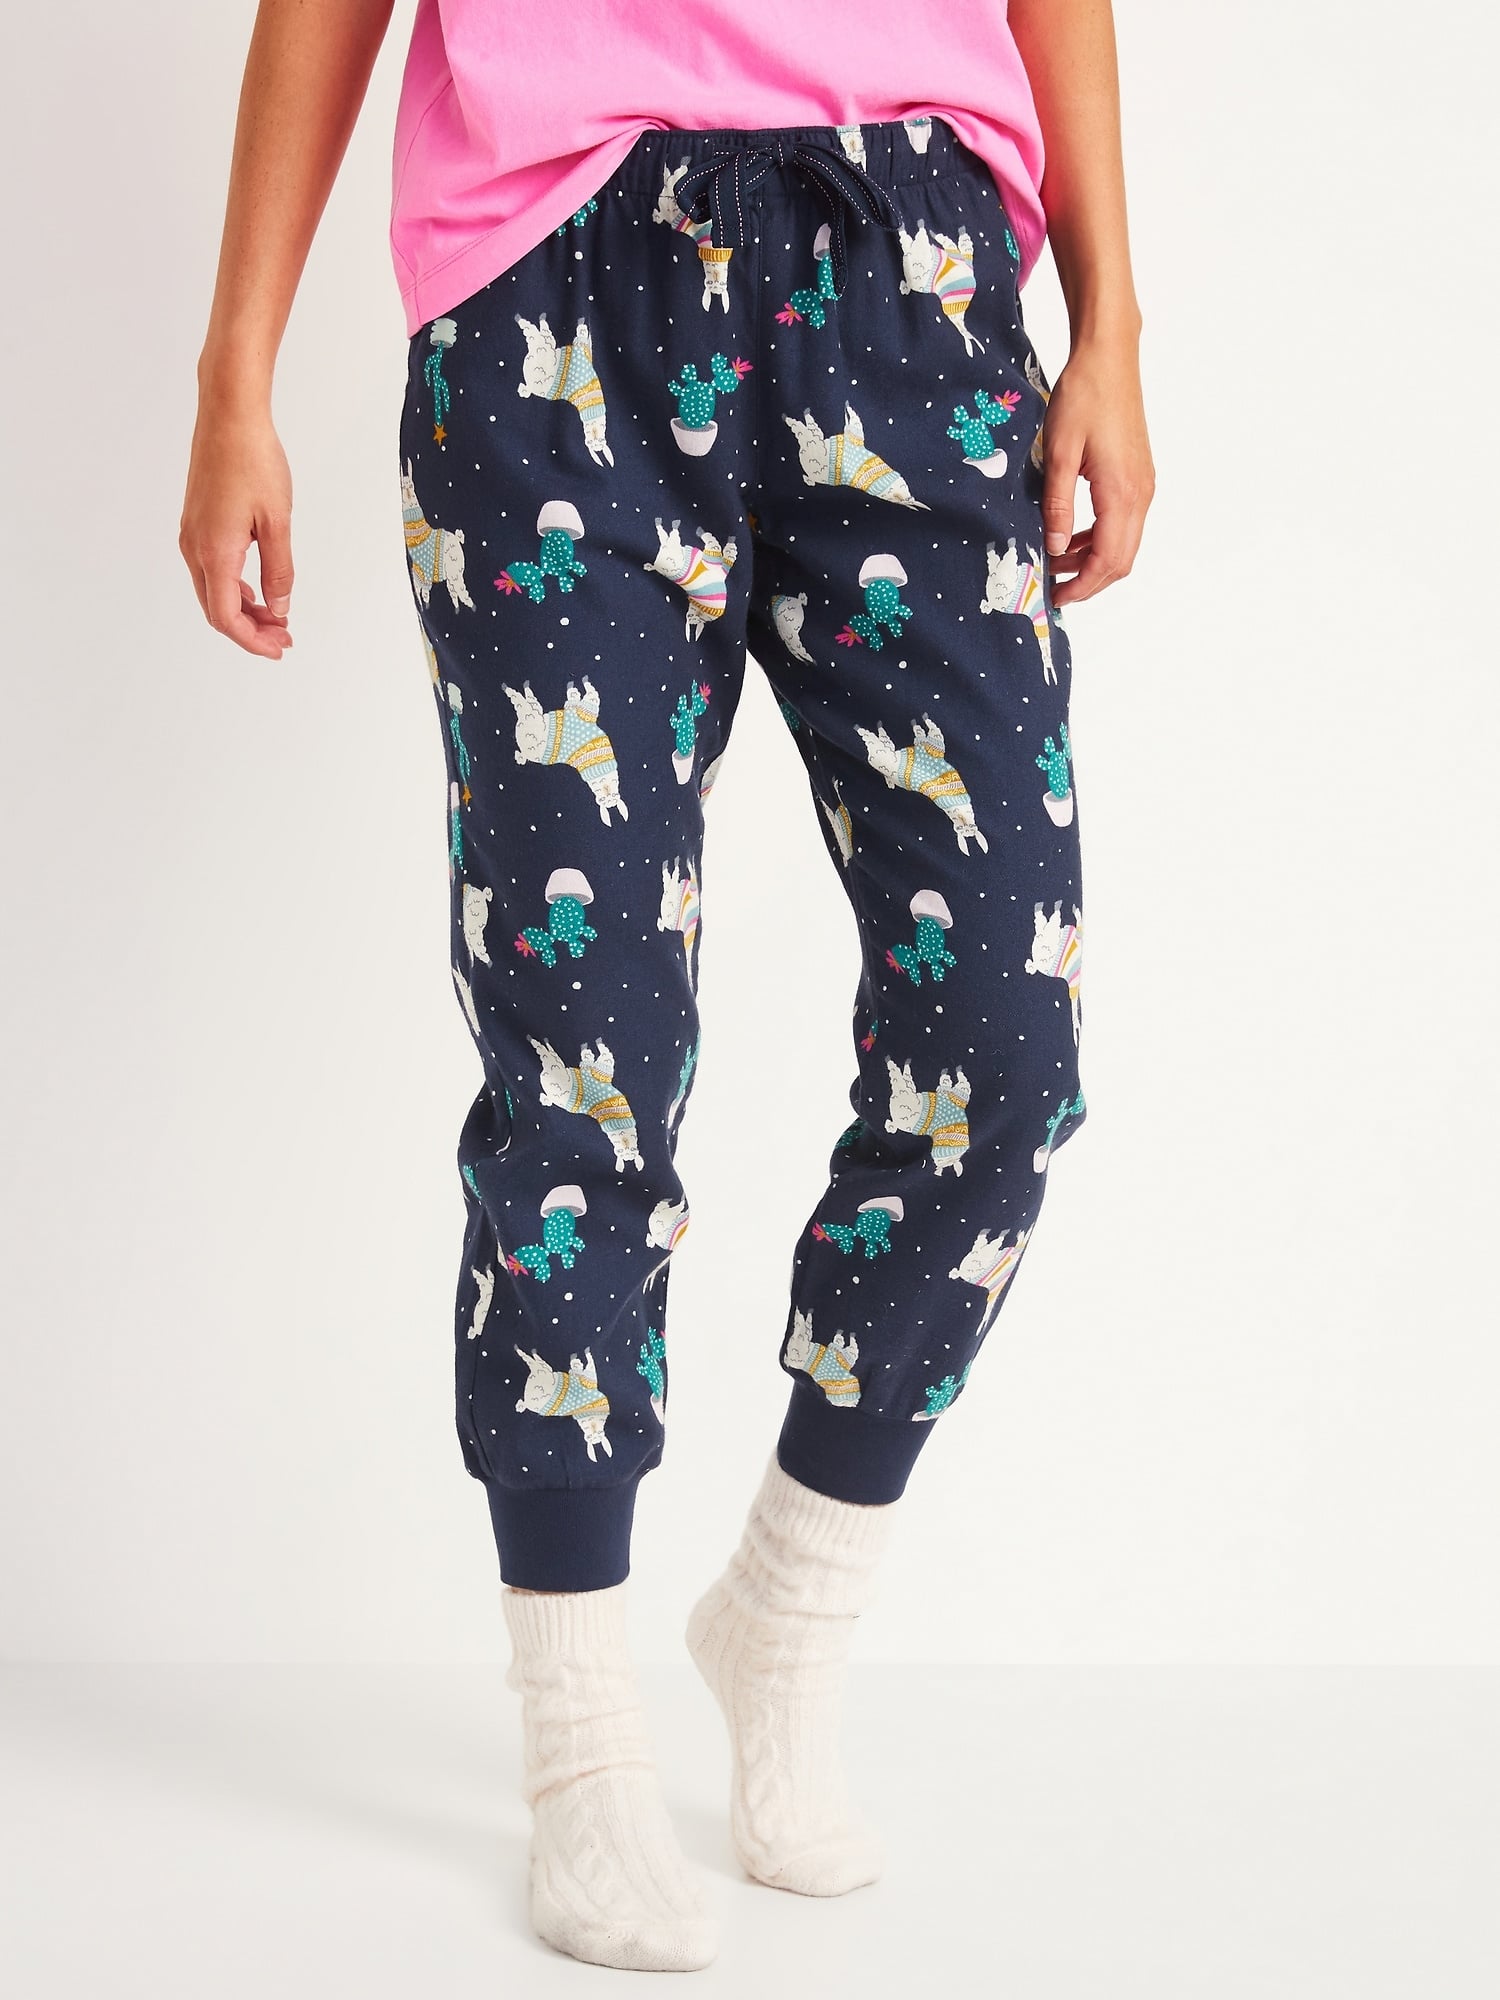 Patterned Flannel Jogger Pajama Pants for Women